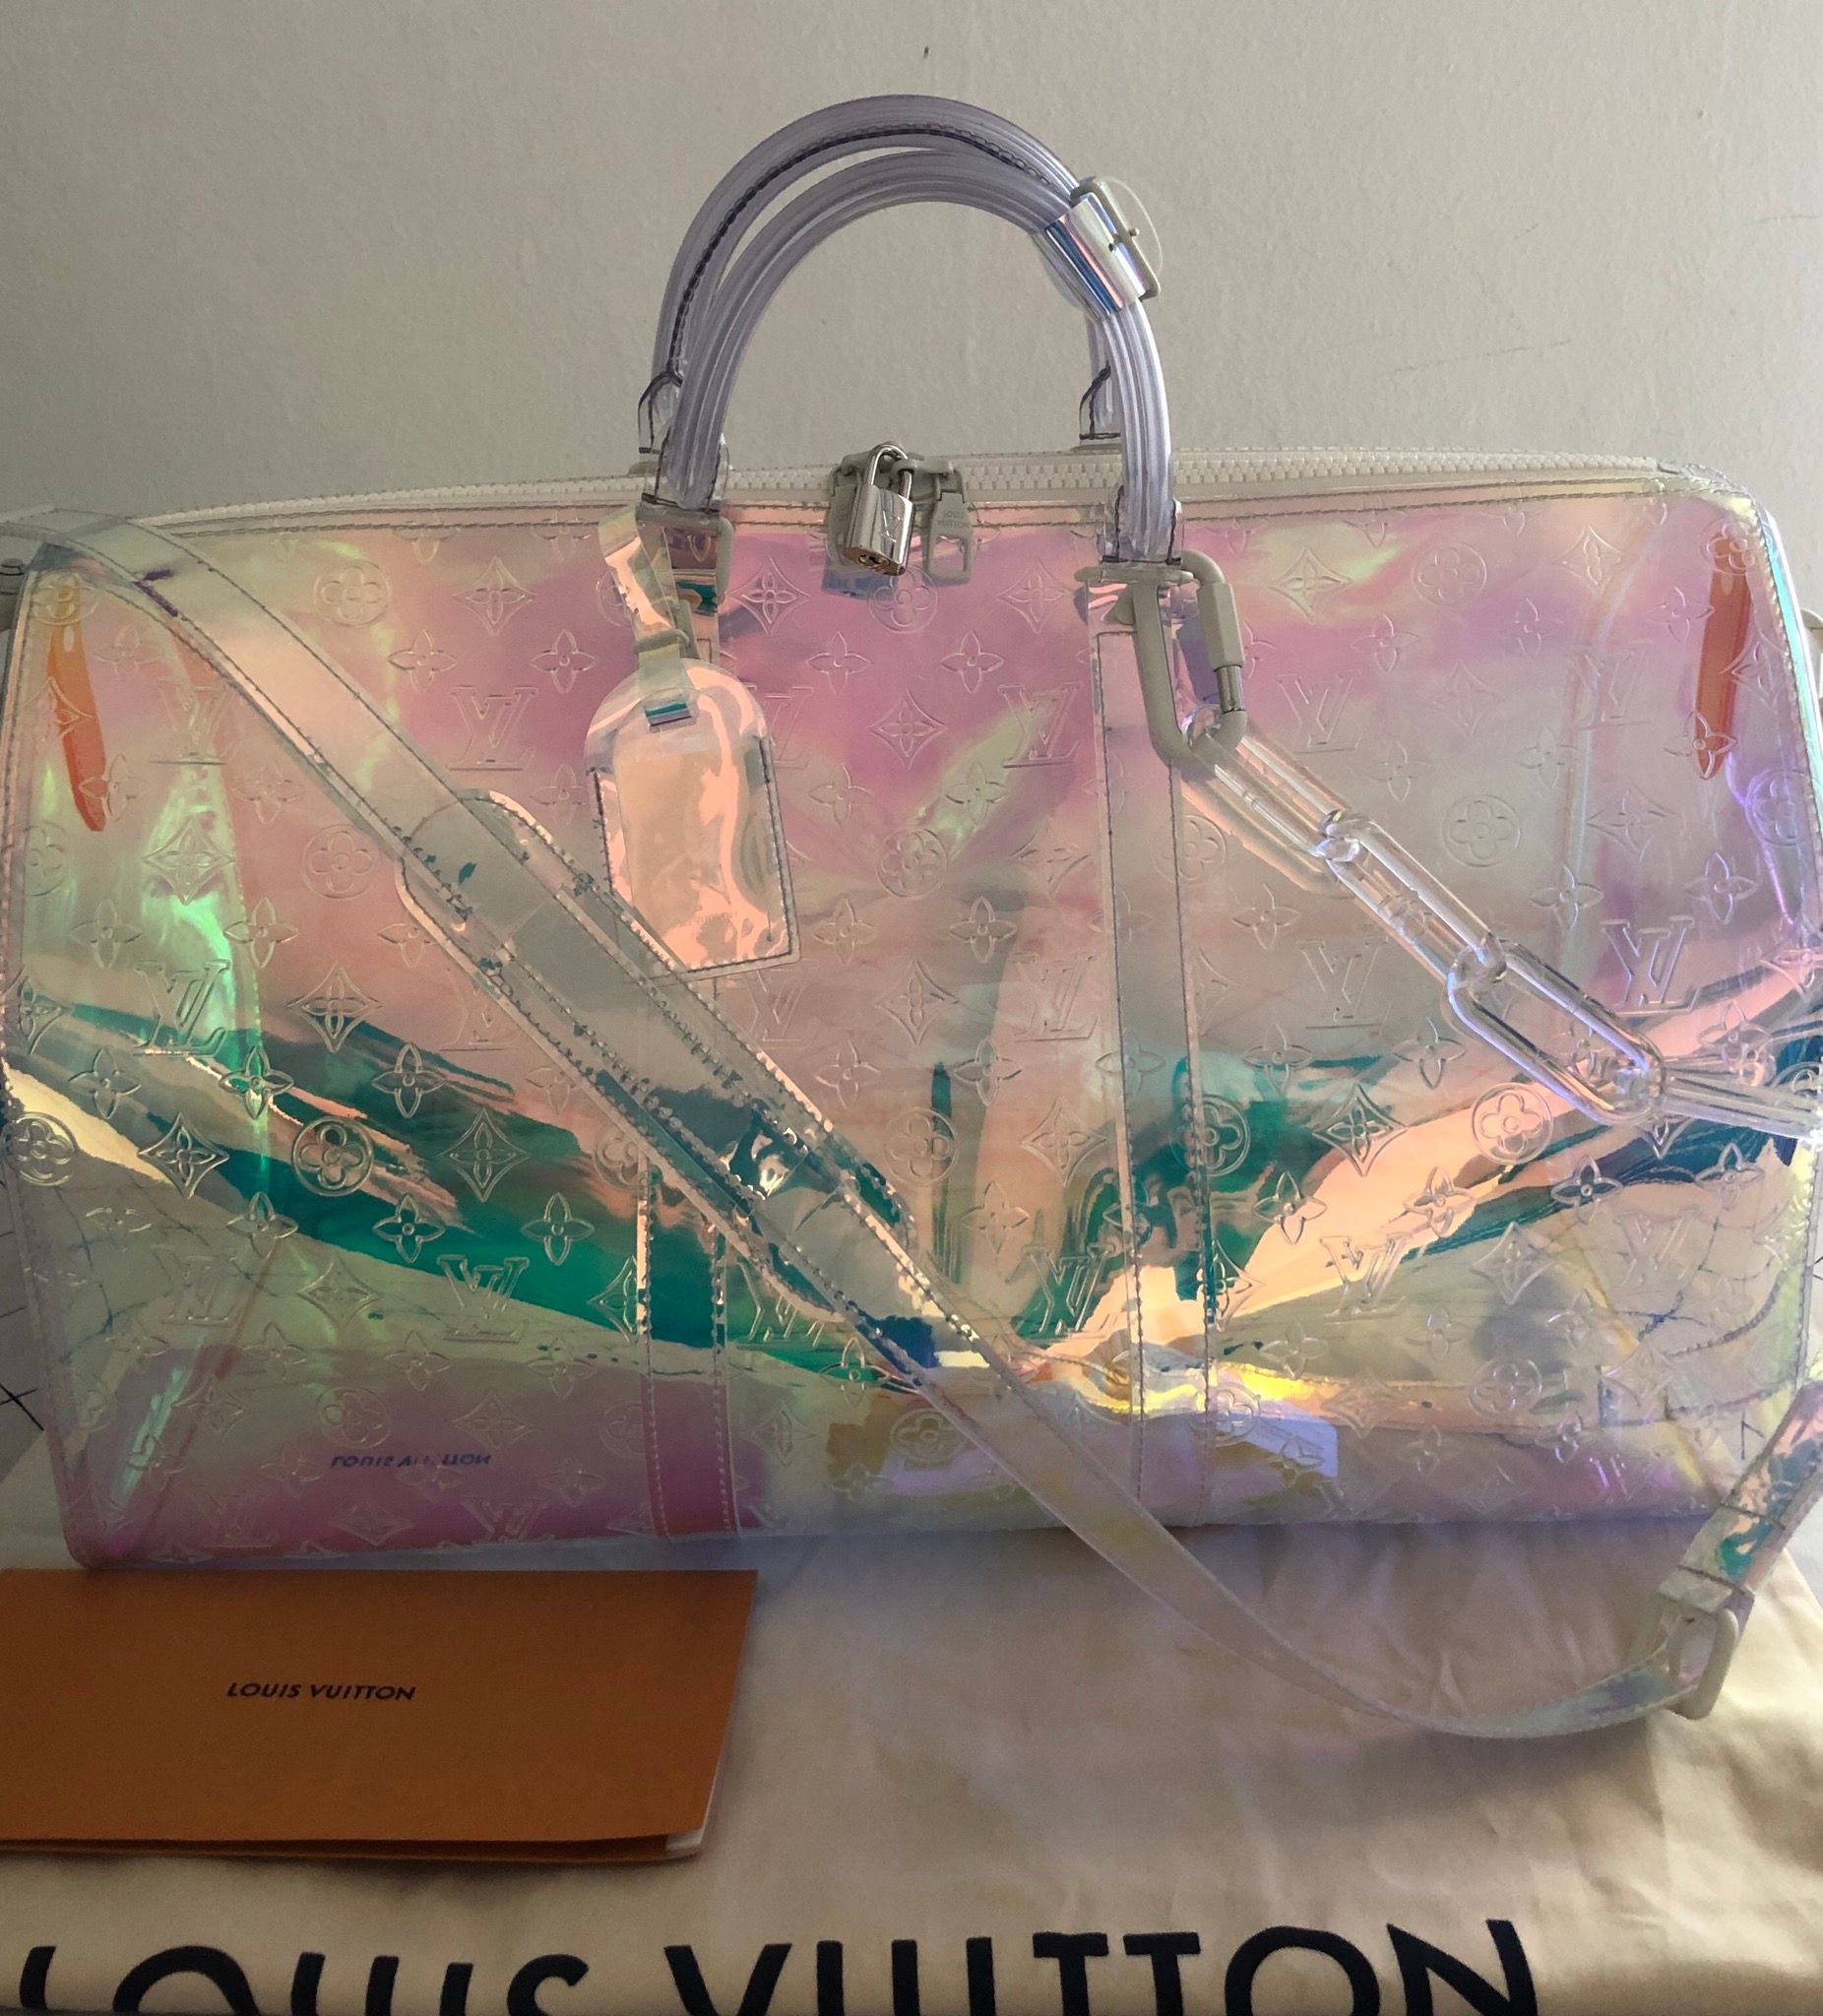 Louis Vuitton Prism Virgil Abloh Iridescent Monogram Keepall Bandoulière 50  White Hardware Available For Immediate Sale At Sotheby's